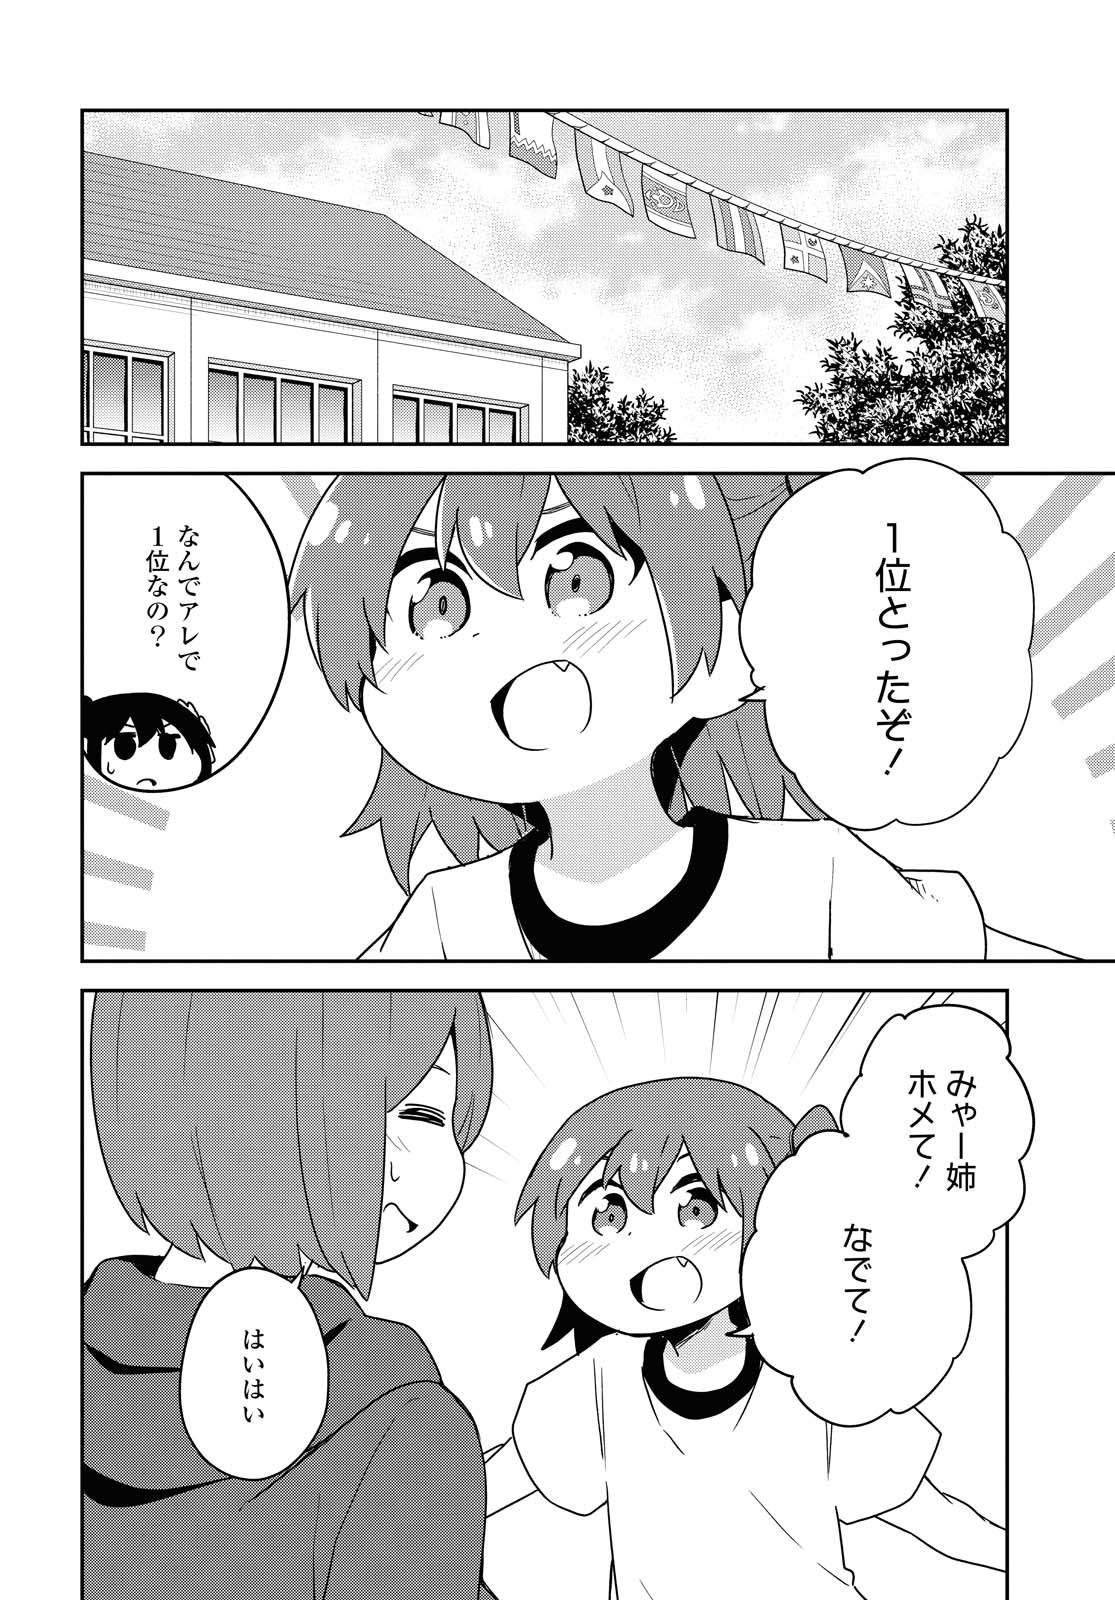 Wataten! An Angel Flew Down to Me 私に天使が舞い降りた！ 第84話 - Page 14